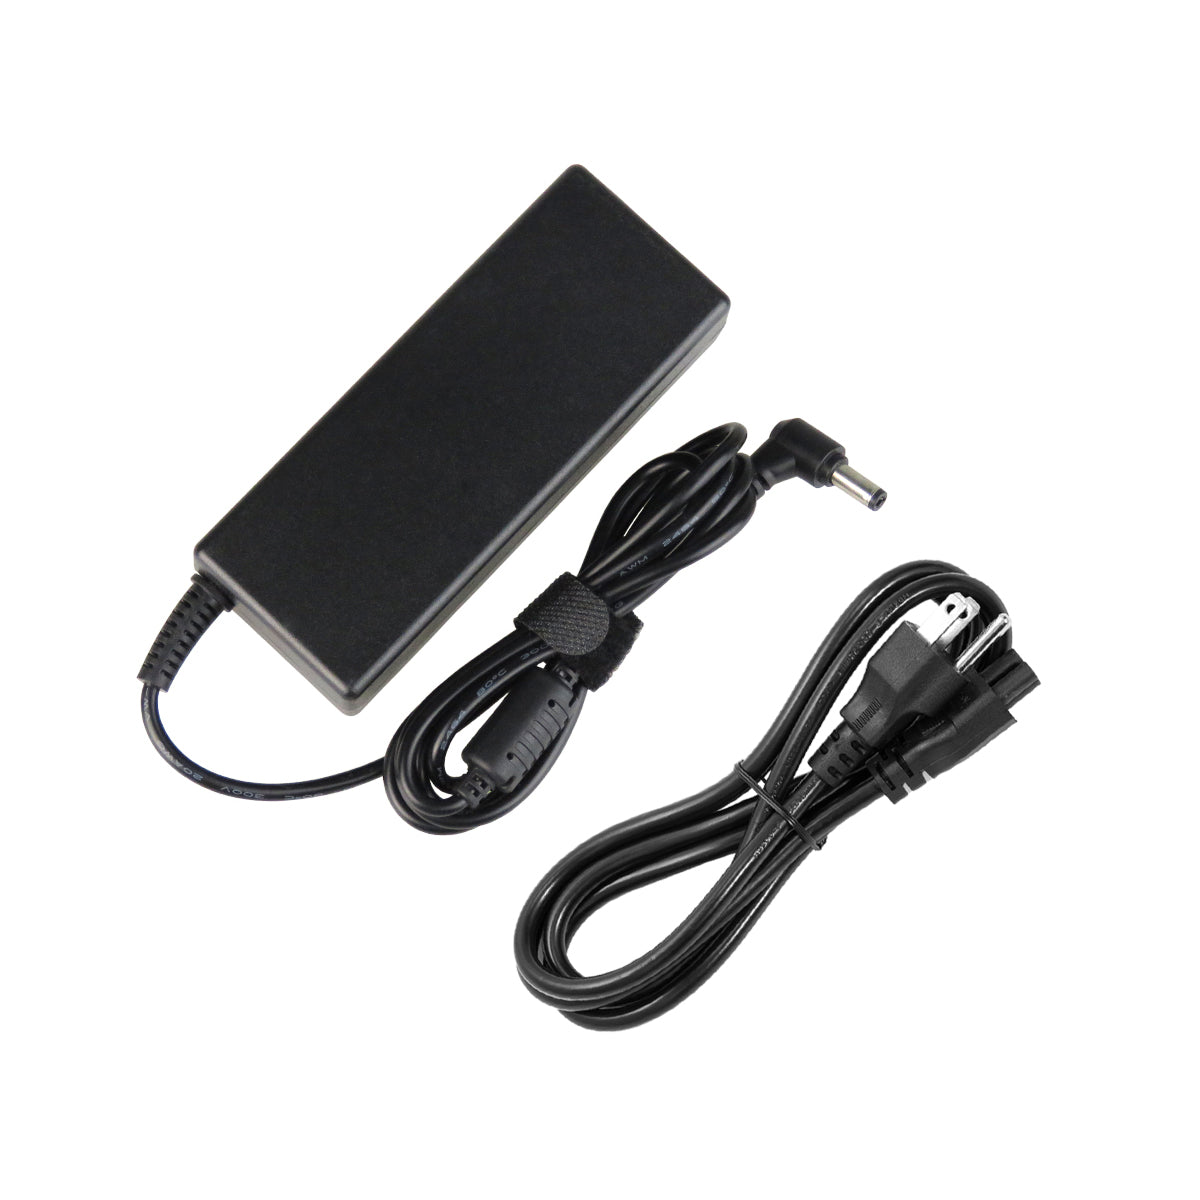 AC Adapter Charger for ASUS A43 Notebook.